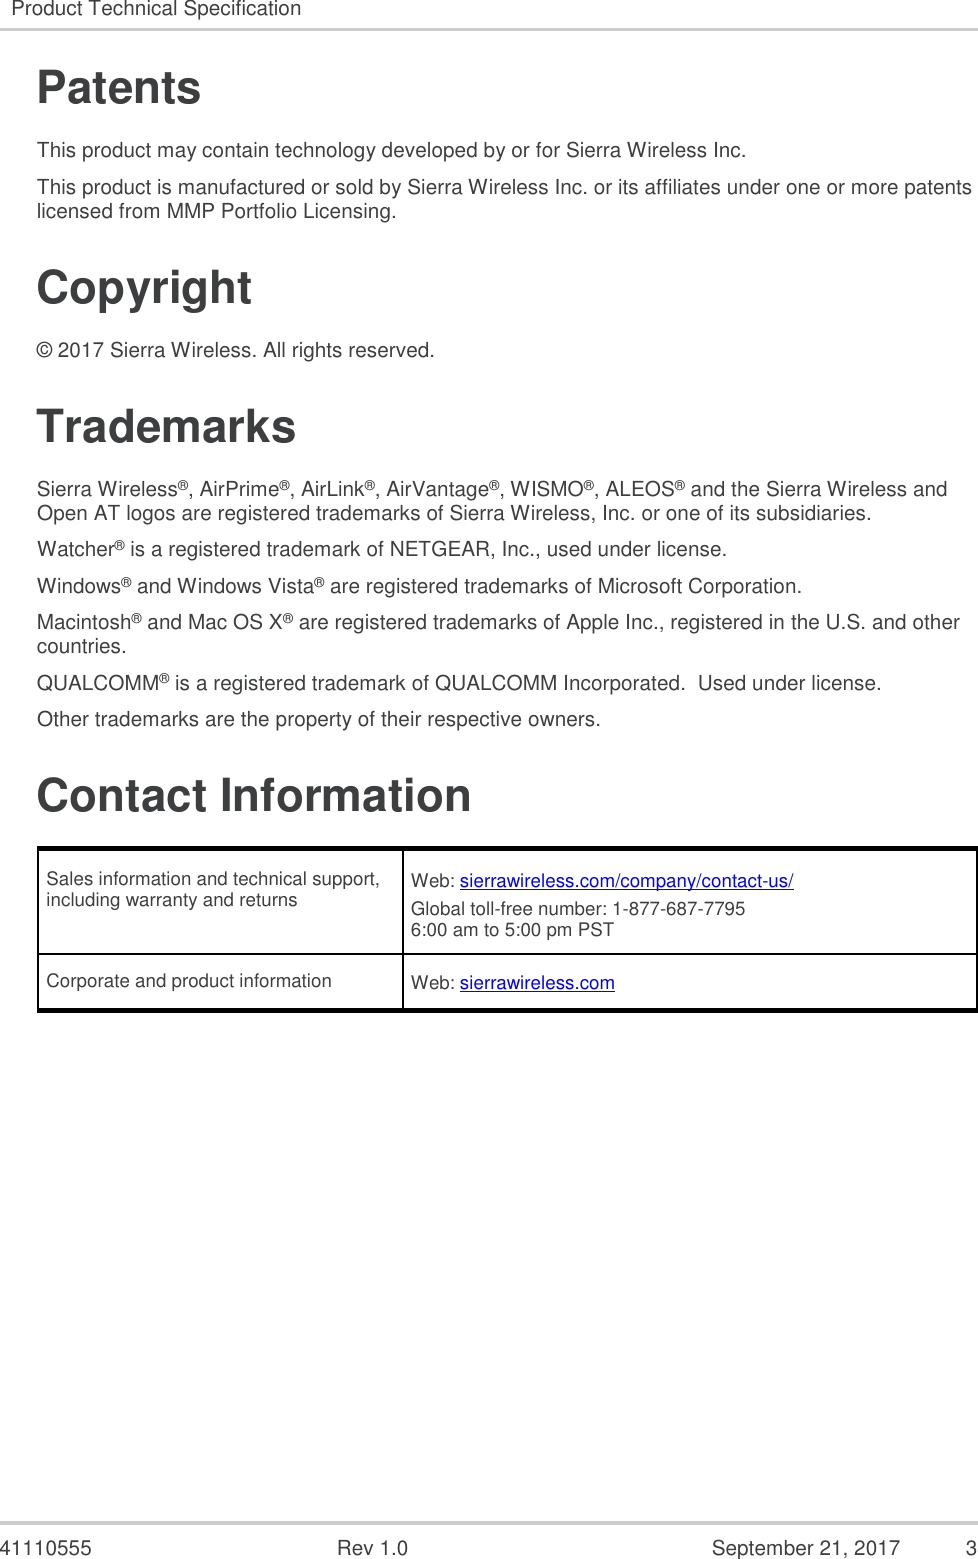   41110555  Rev 1.0  September 21, 2017  3 Product Technical Specification   Patents This product may contain technology developed by or for Sierra Wireless Inc. This product is manufactured or sold by Sierra Wireless Inc. or its affiliates under one or more patents licensed from MMP Portfolio Licensing. Copyright © 2017 Sierra Wireless. All rights reserved. Trademarks Sierra Wireless®, AirPrime®, AirLink®, AirVantage®, WISMO®, ALEOS® and the Sierra Wireless and Open AT logos are registered trademarks of Sierra Wireless, Inc. or one of its subsidiaries. Watcher® is a registered trademark of NETGEAR, Inc., used under license. Windows® and Windows Vista® are registered trademarks of Microsoft Corporation. Macintosh® and Mac OS X® are registered trademarks of Apple Inc., registered in the U.S. and other countries. QUALCOMM® is a registered trademark of QUALCOMM Incorporated.  Used under license. Other trademarks are the property of their respective owners. Contact Information Sales information and technical support, including warranty and returns Web: sierrawireless.com/company/contact-us/ Global toll-free number: 1-877-687-7795 6:00 am to 5:00 pm PST Corporate and product information Web: sierrawireless.com    